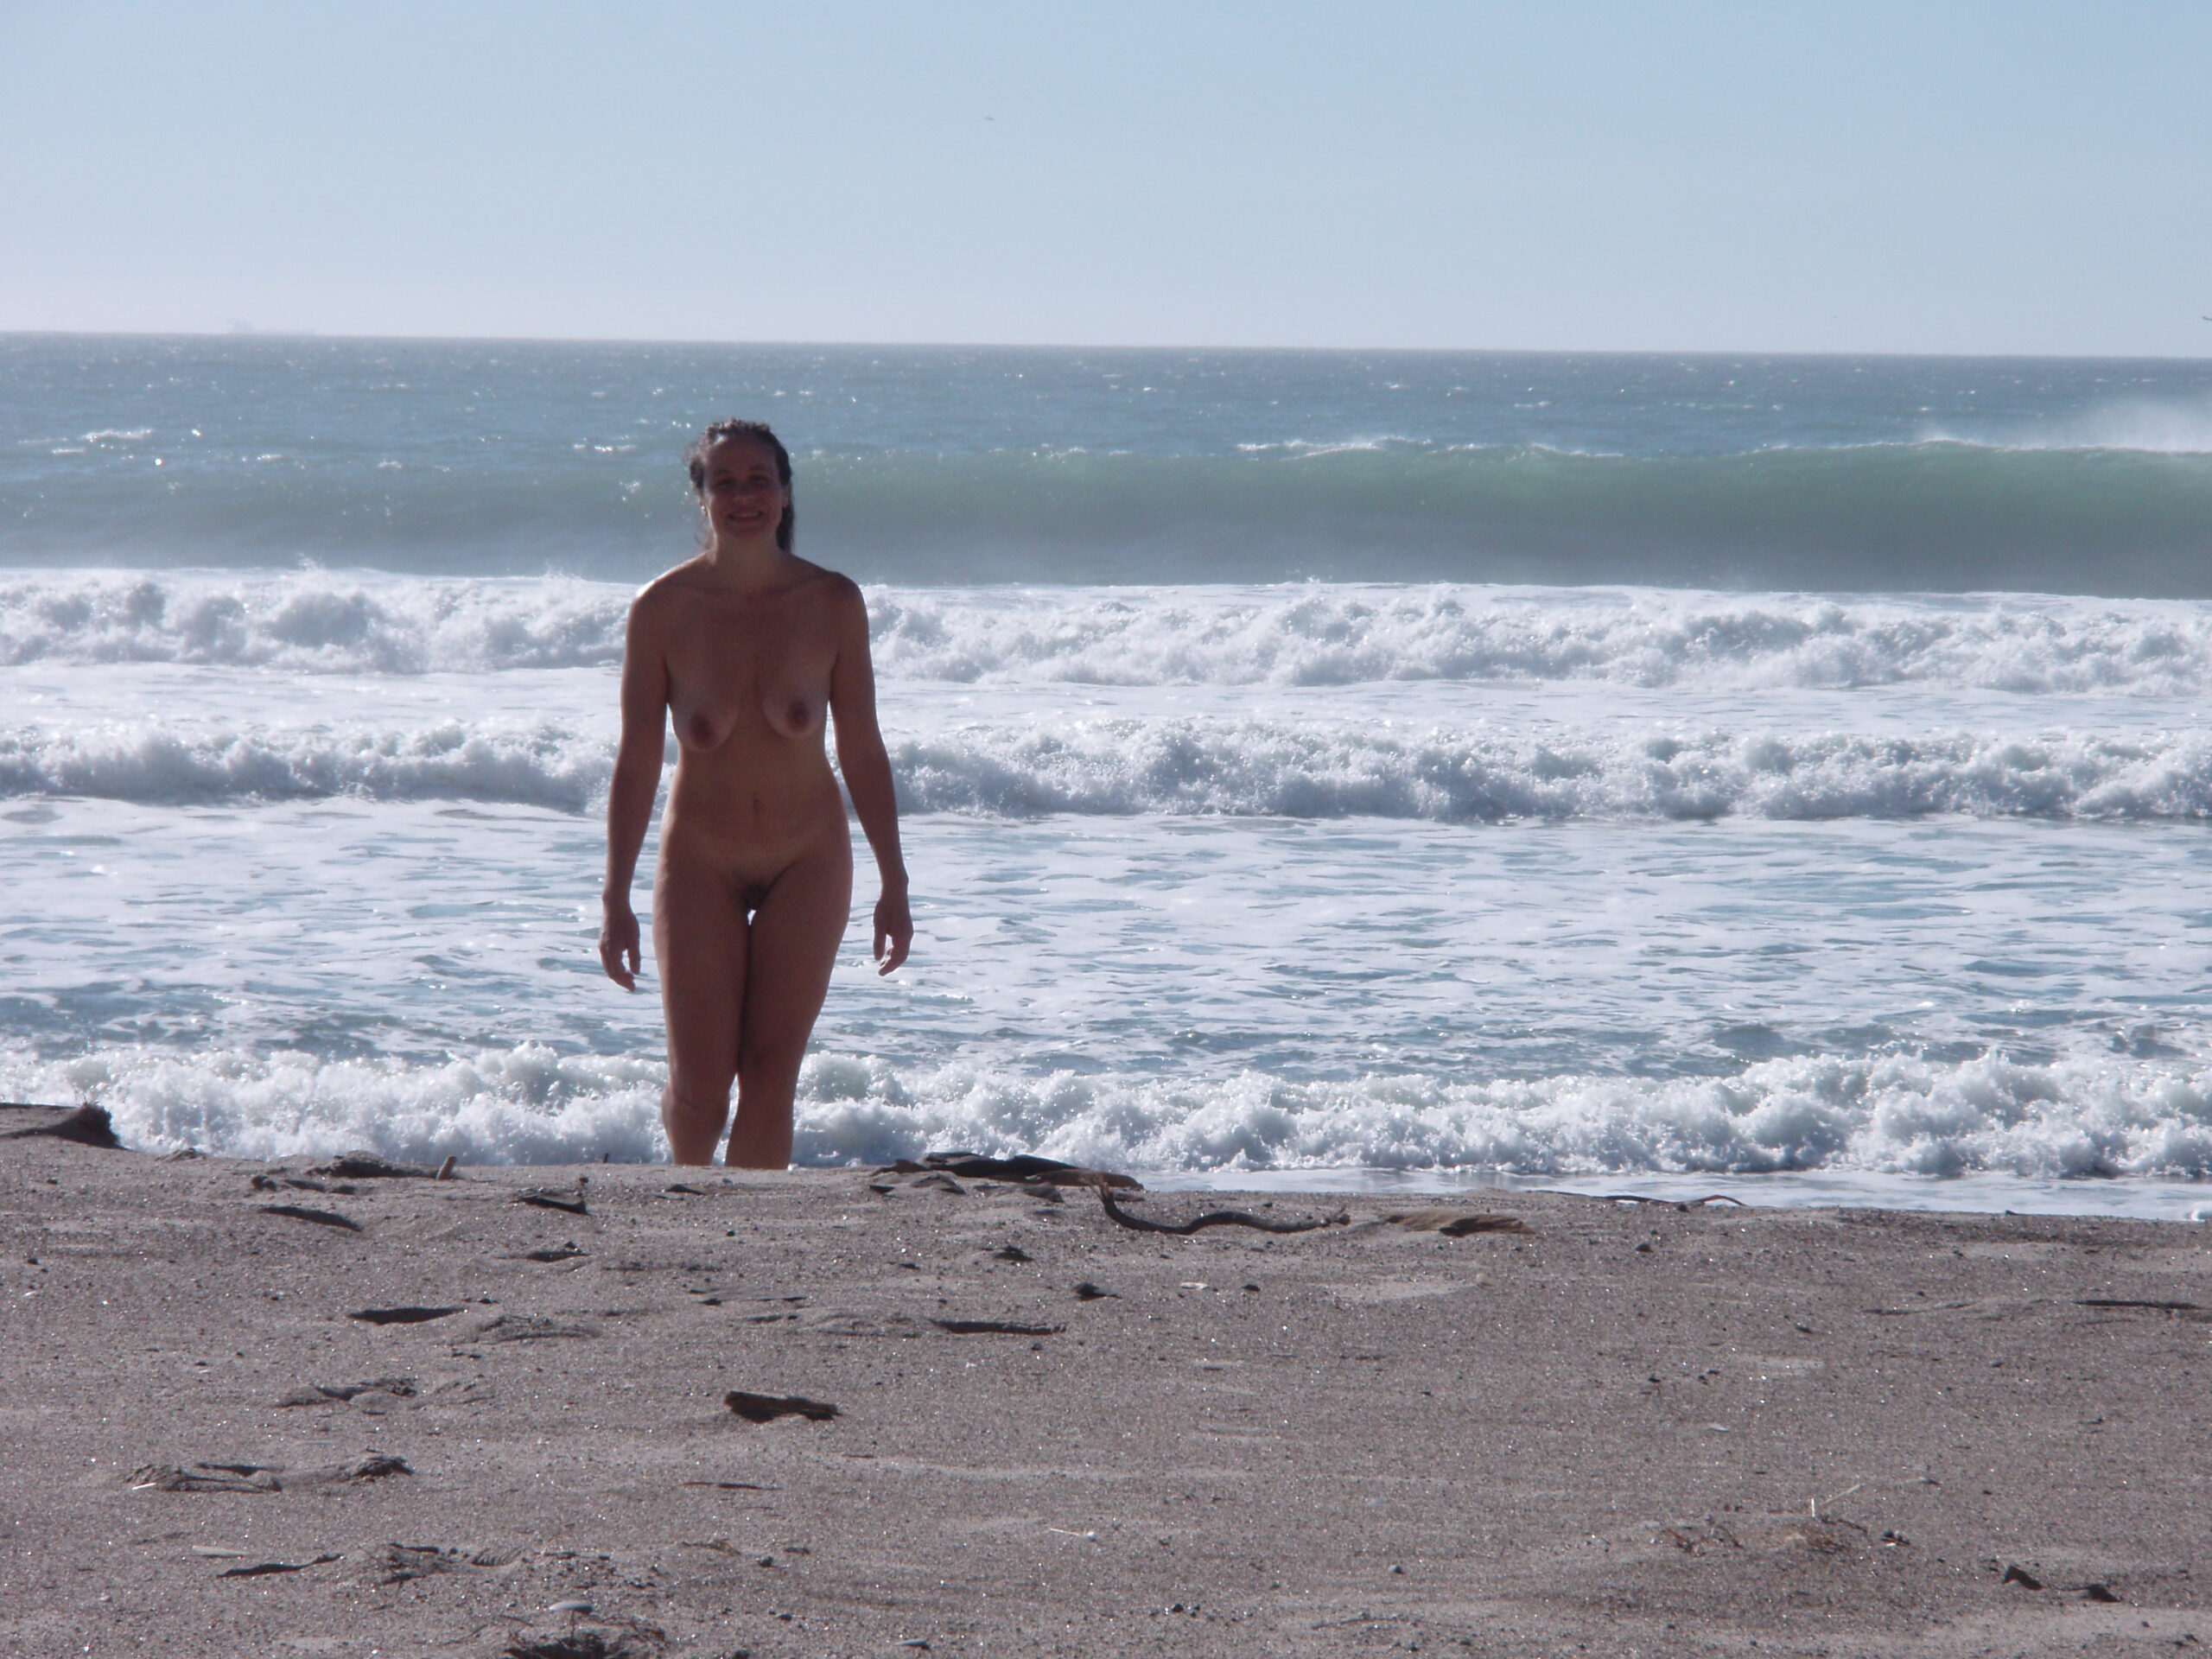 Walking naked on a nude beach after a swim